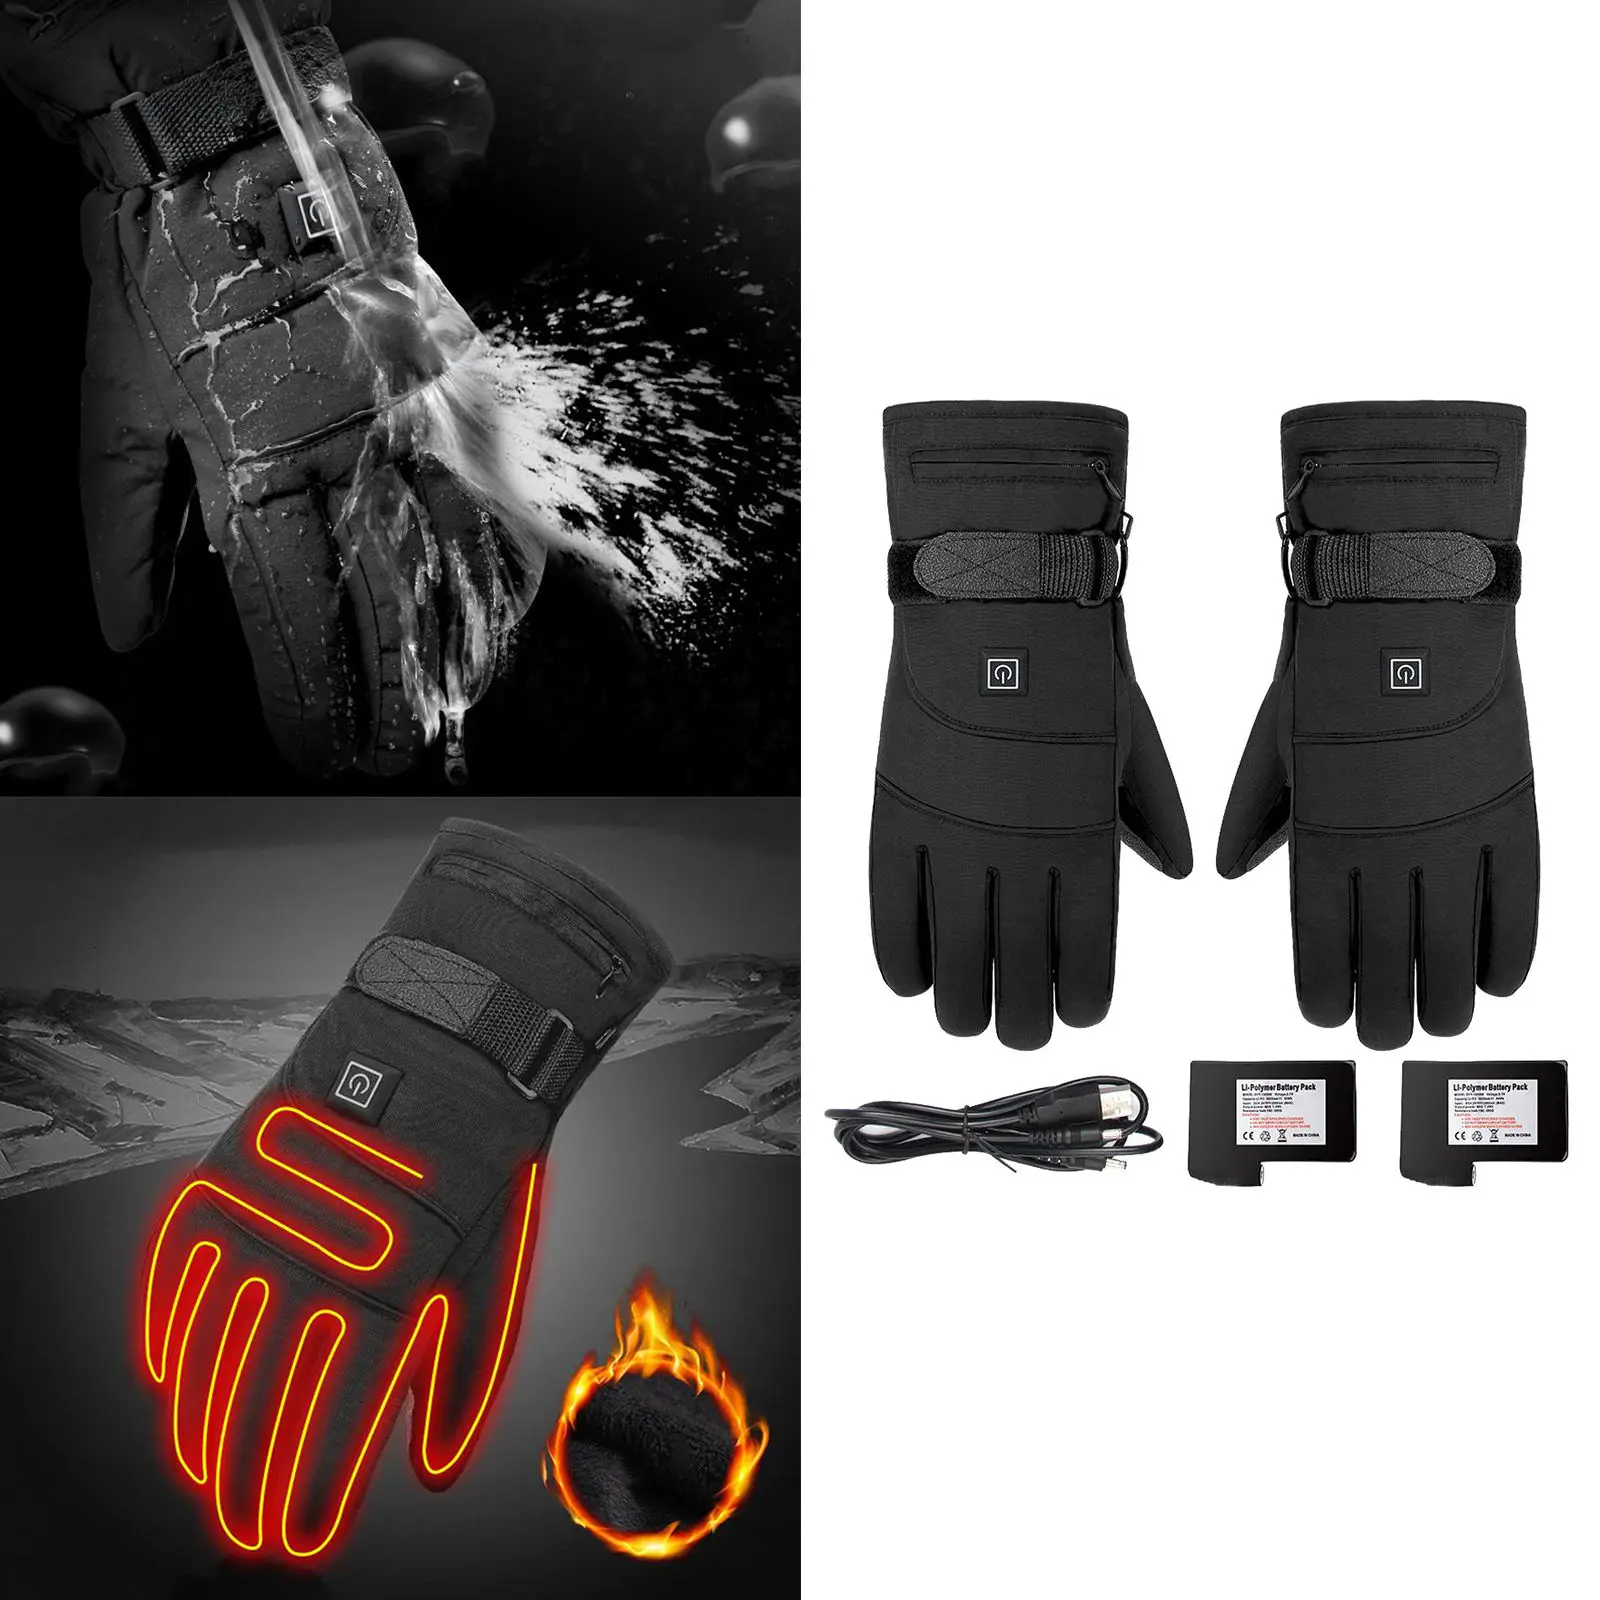 Electric Heated Gloves 3 Levels Temperature Control Thermal Gloves Warm Touchscreen Gloves for Skiing Fishing Hiking